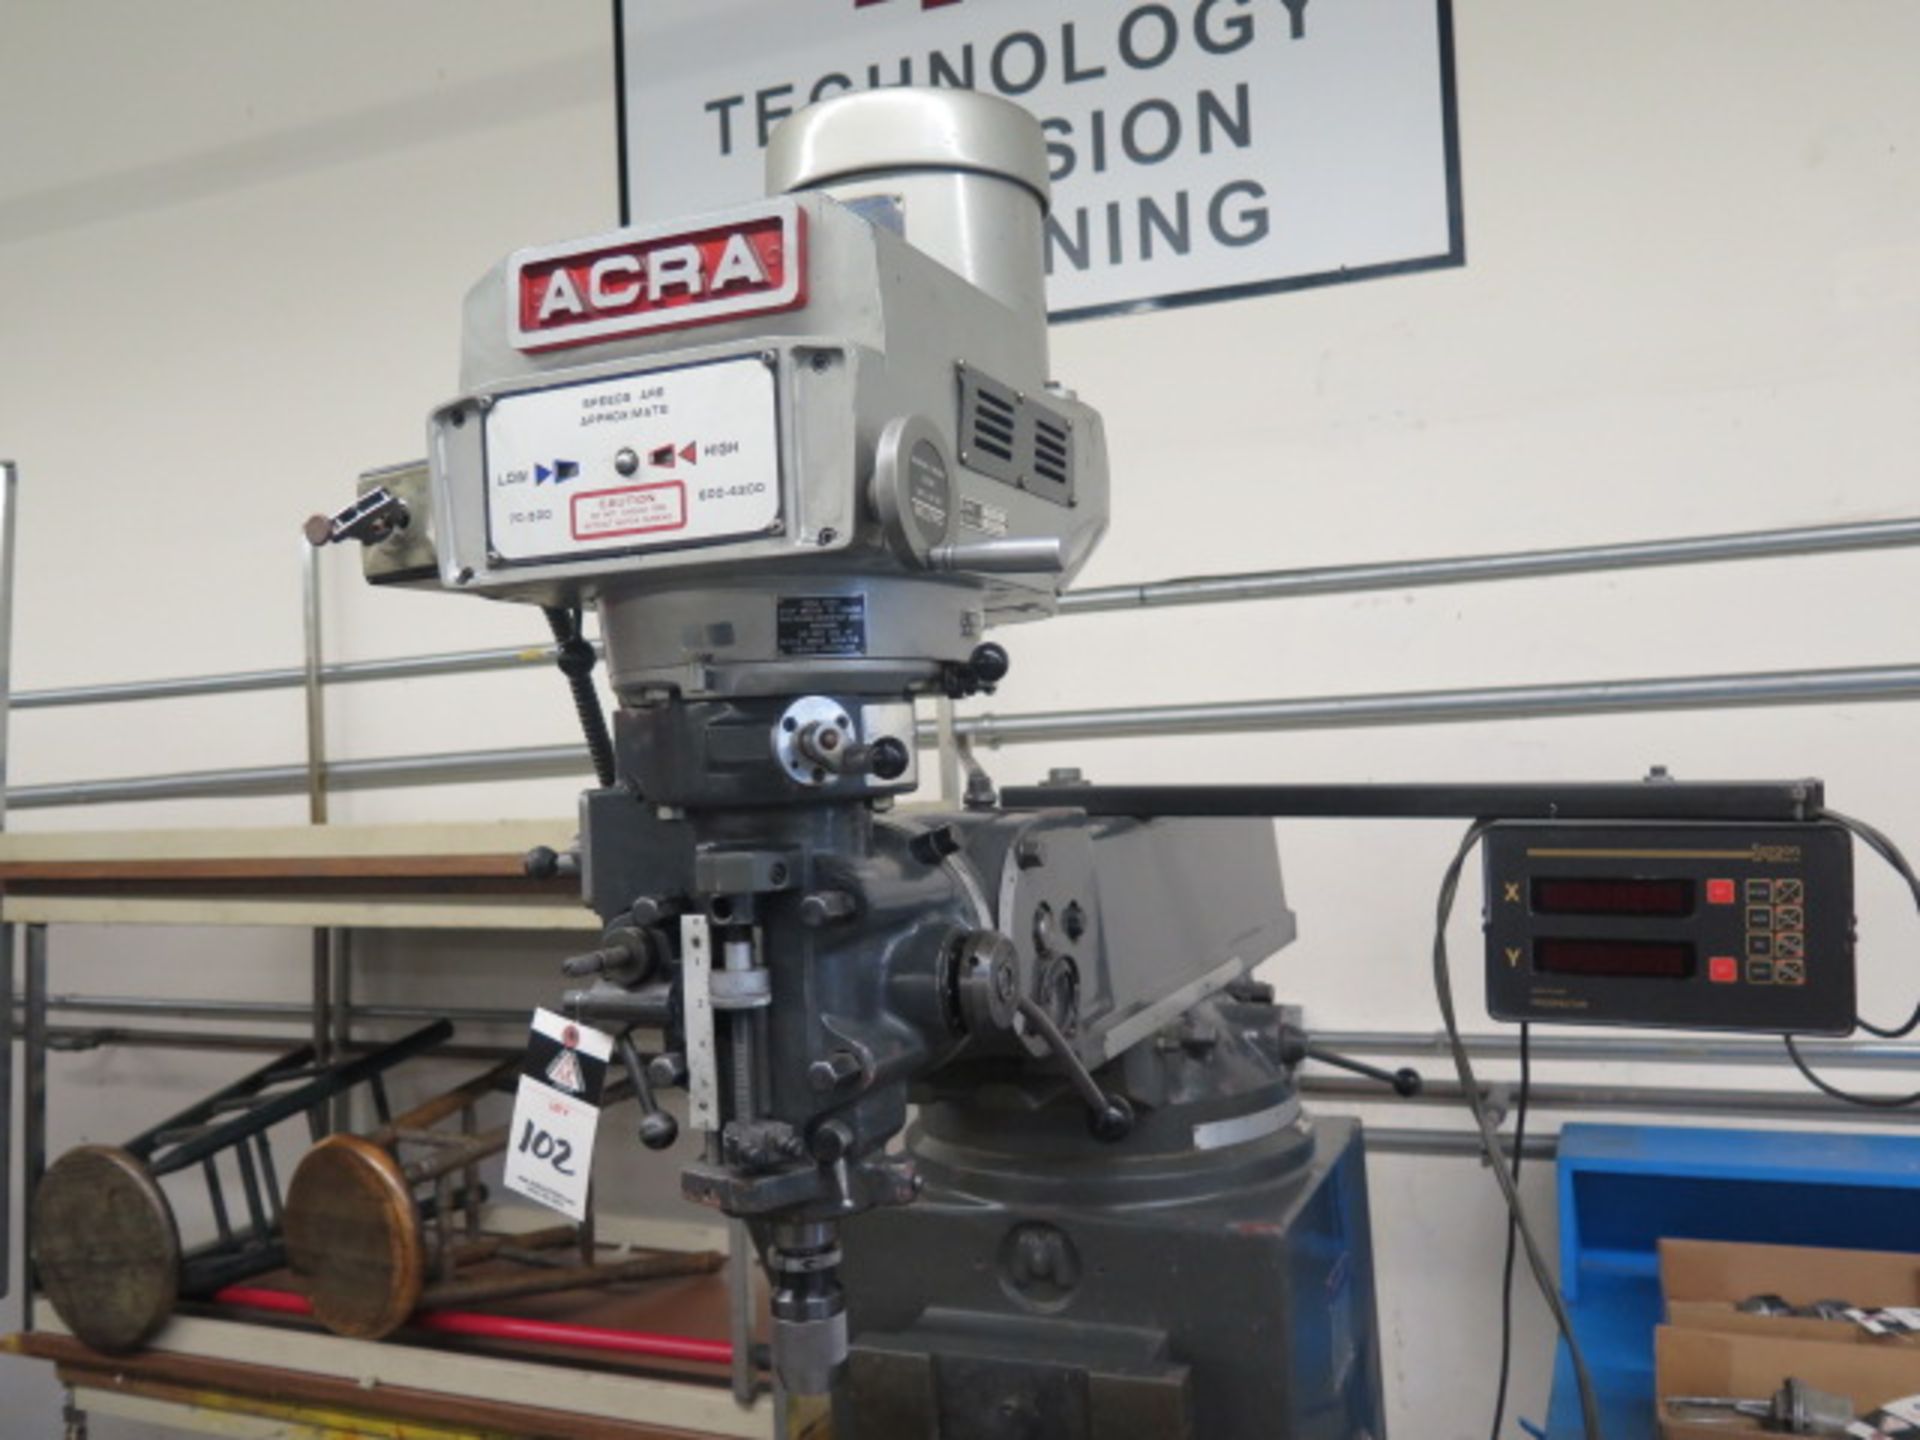 Acra WS-18VH Vertical Mill s/n 802062 w/ Sargon DRO, 3Hp Motor, 70-4200 Dial Change RPM, R8 Spindle, - Image 2 of 6